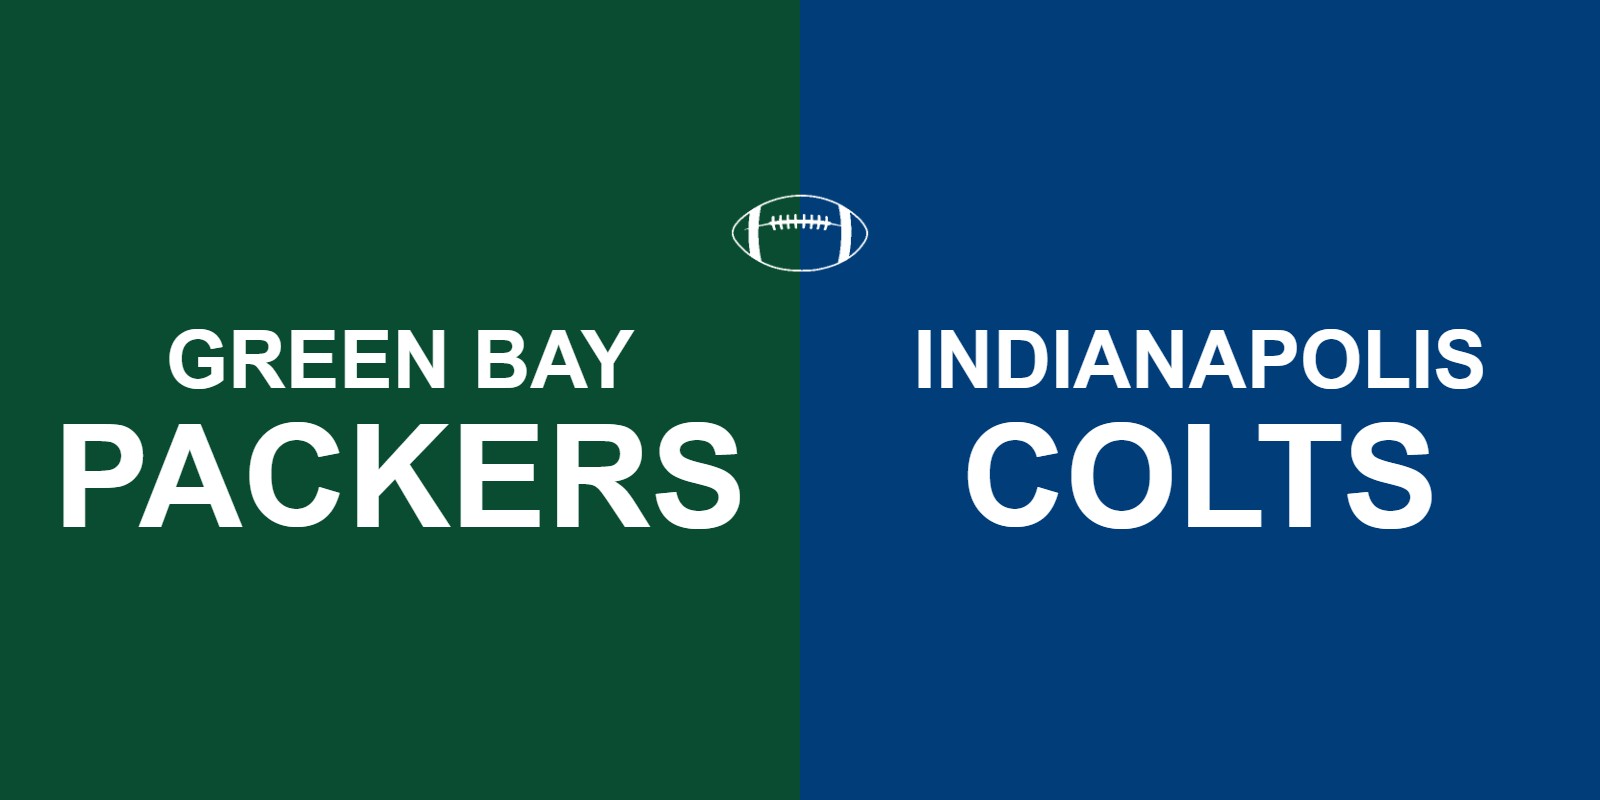 Packers vs Colts